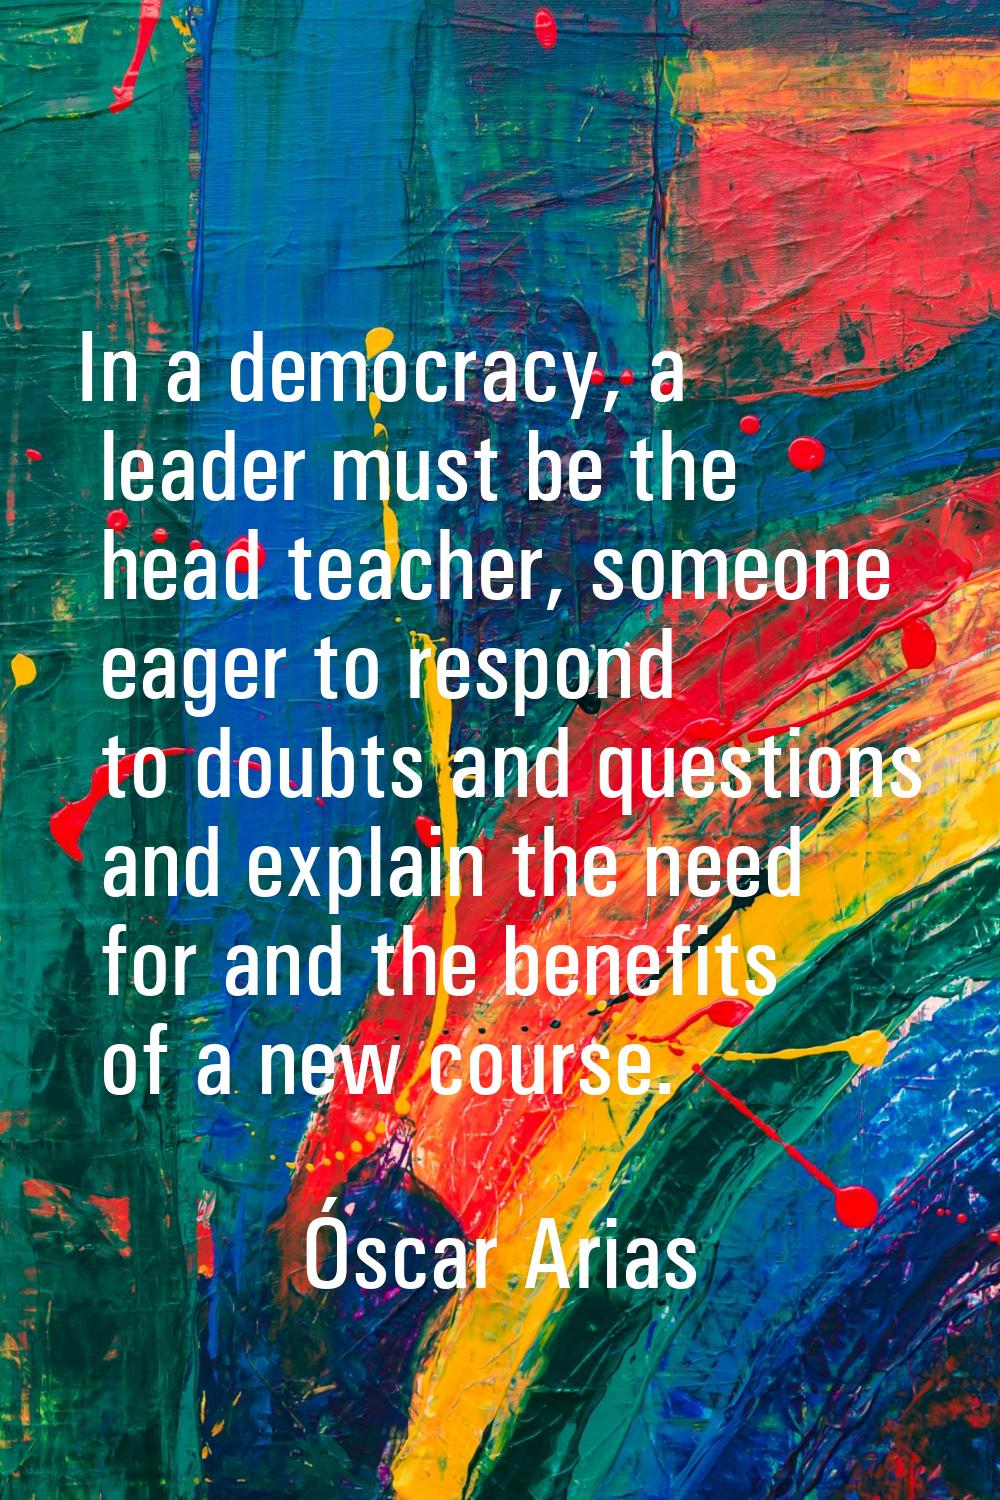 In a democracy, a leader must be the head teacher, someone eager to respond to doubts and questions